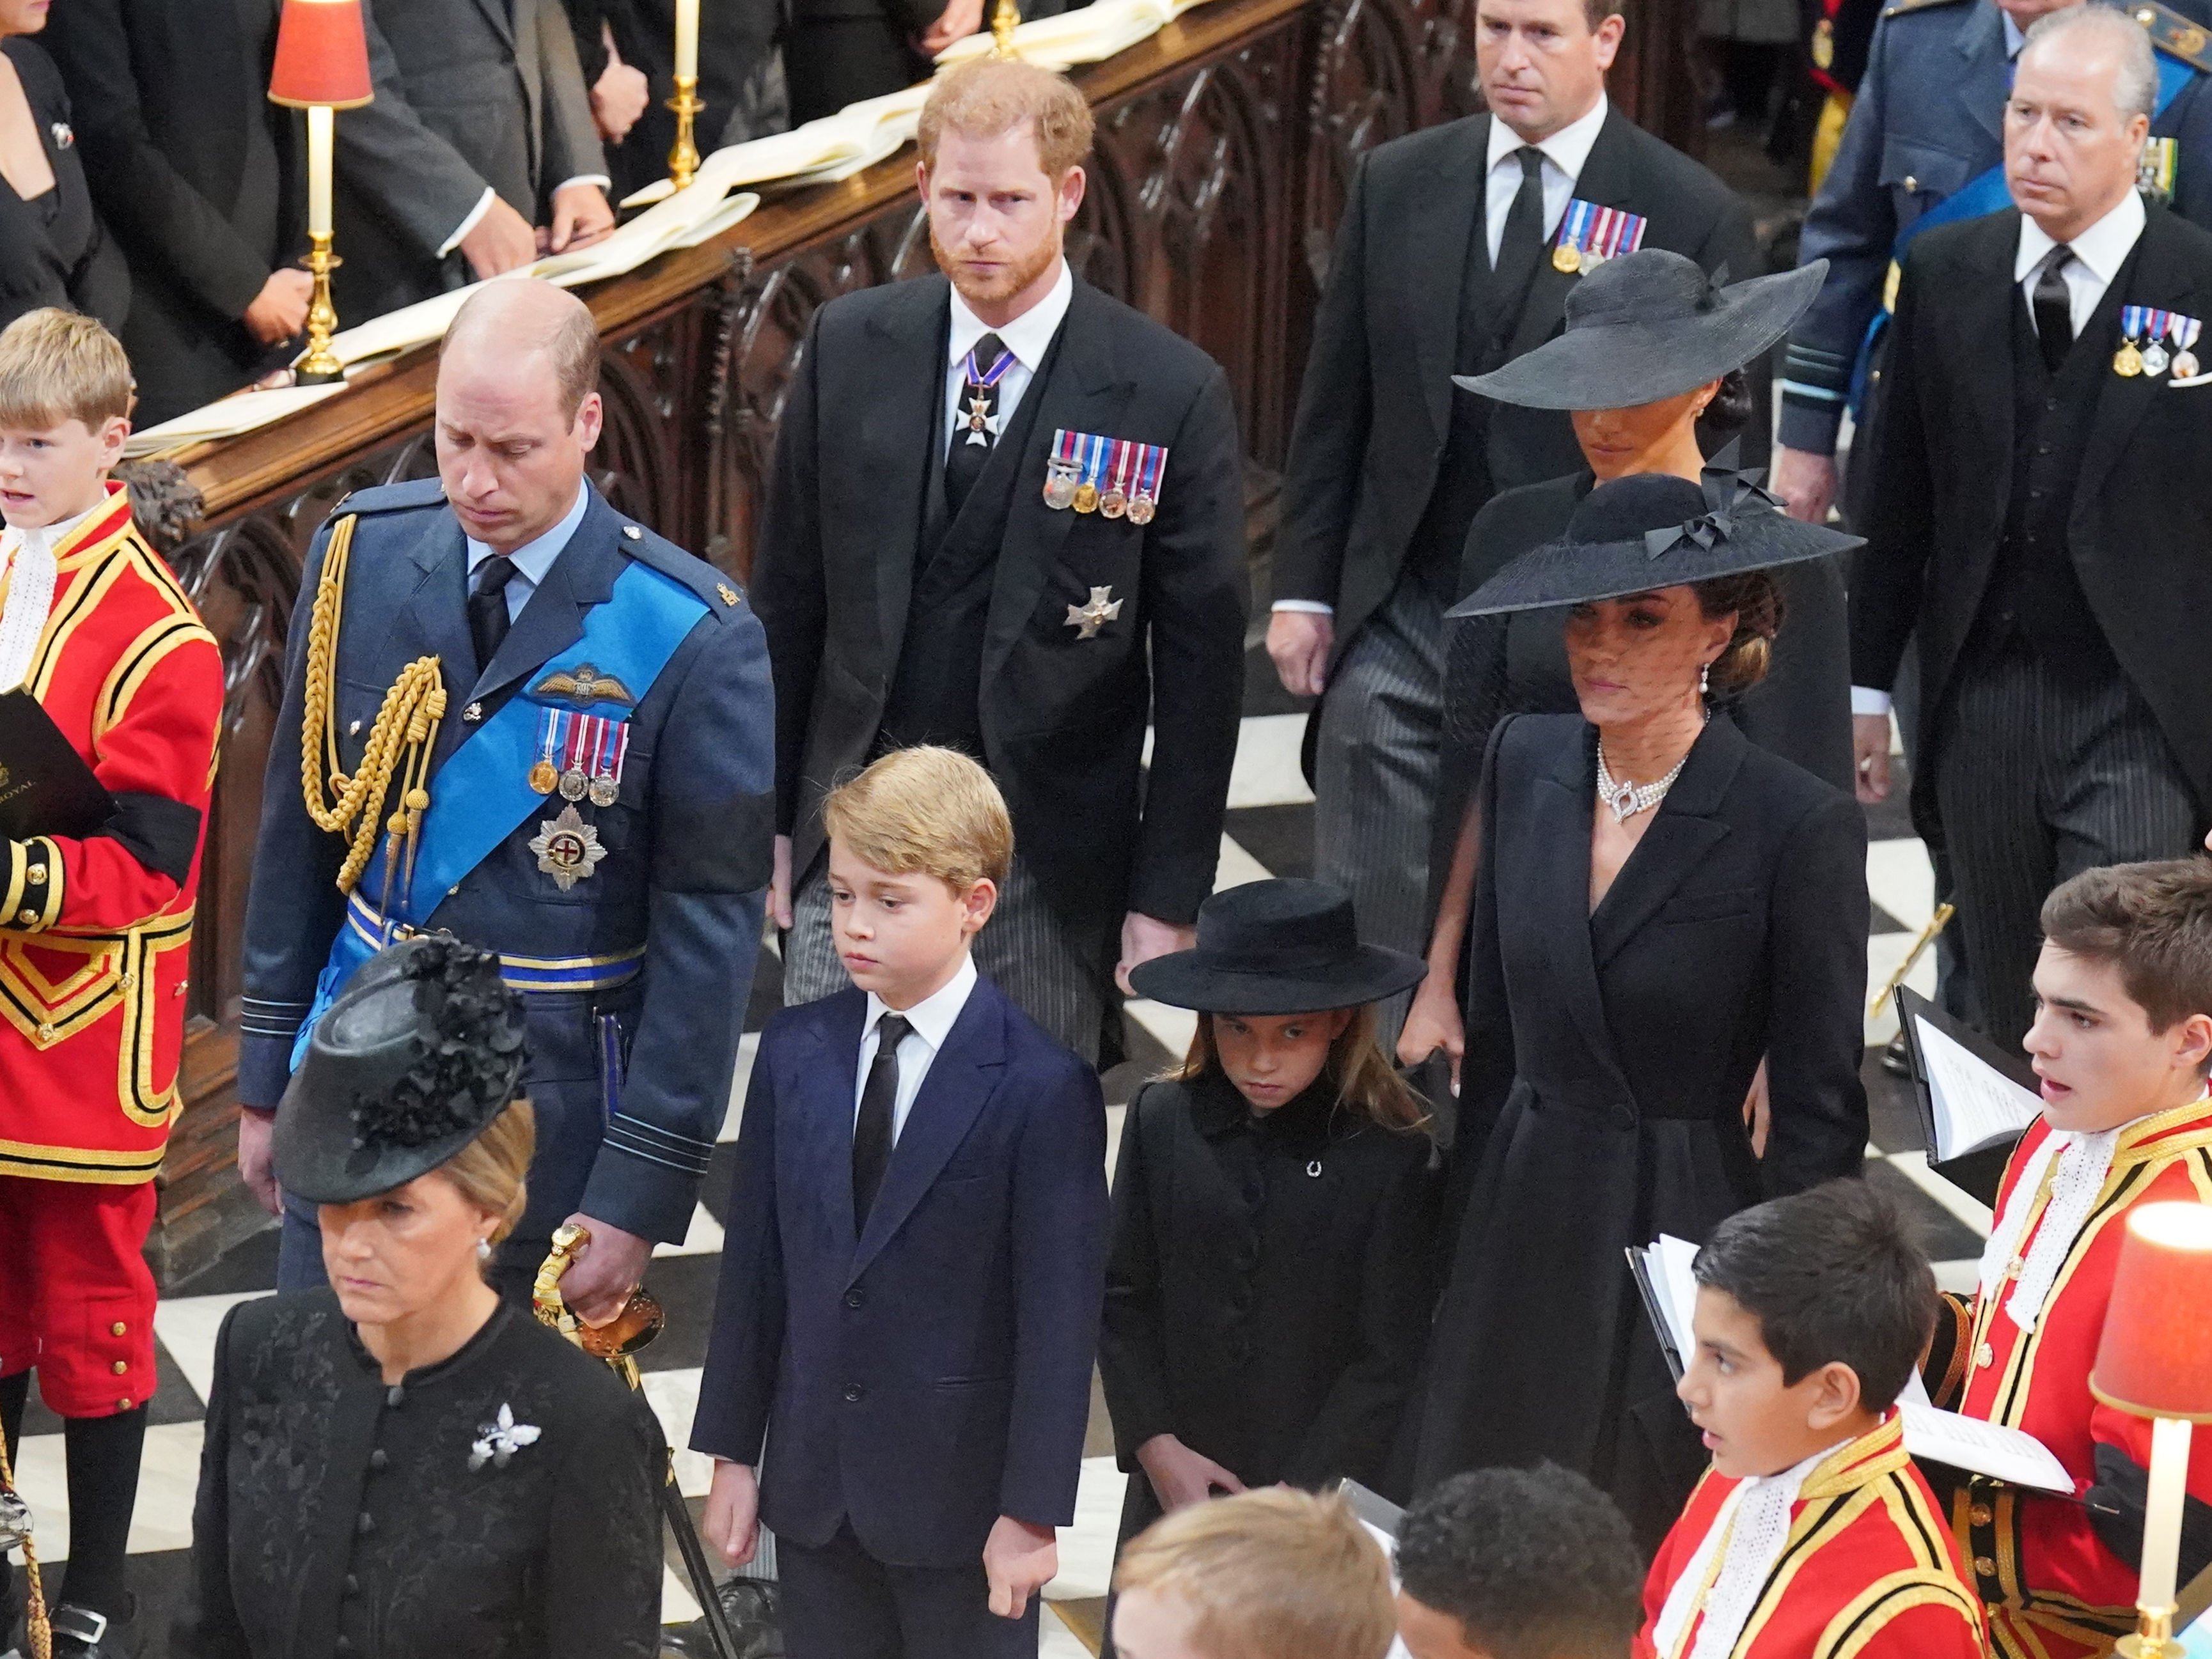 Prince William, Prince of Wales, Prince George of Wales, Prince Harry, Duke of Sussex, Meghan, Duchess of Sussex, and Catherine, Princess of Wales, during the State Funeral of Queen Elizabeth II at Westminster Abbey on September 19, 2022, in London, England. | Source: Getty Images